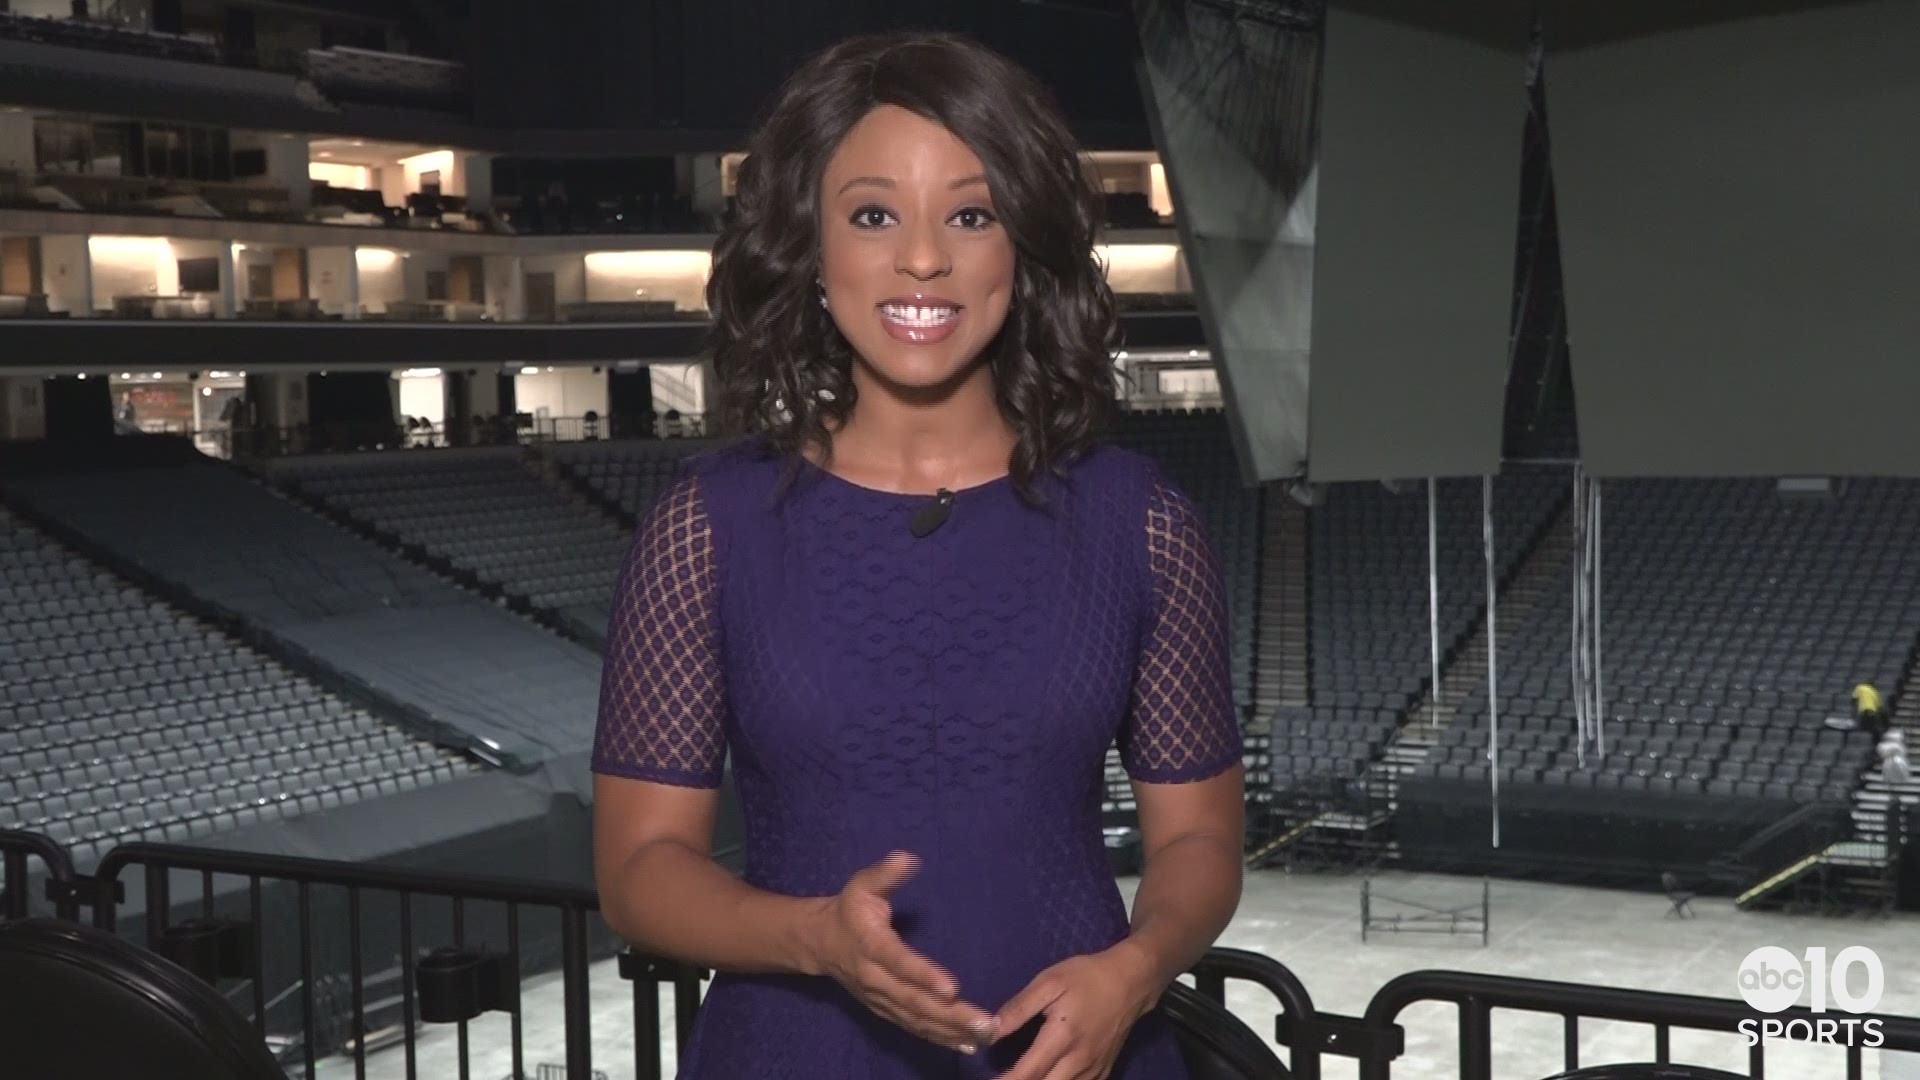 ABC10's Lina Washington and Kings General Manager Vlade Divac explains why Sacramento drafted Marvin Bagley III second overall in the NBA Draft.